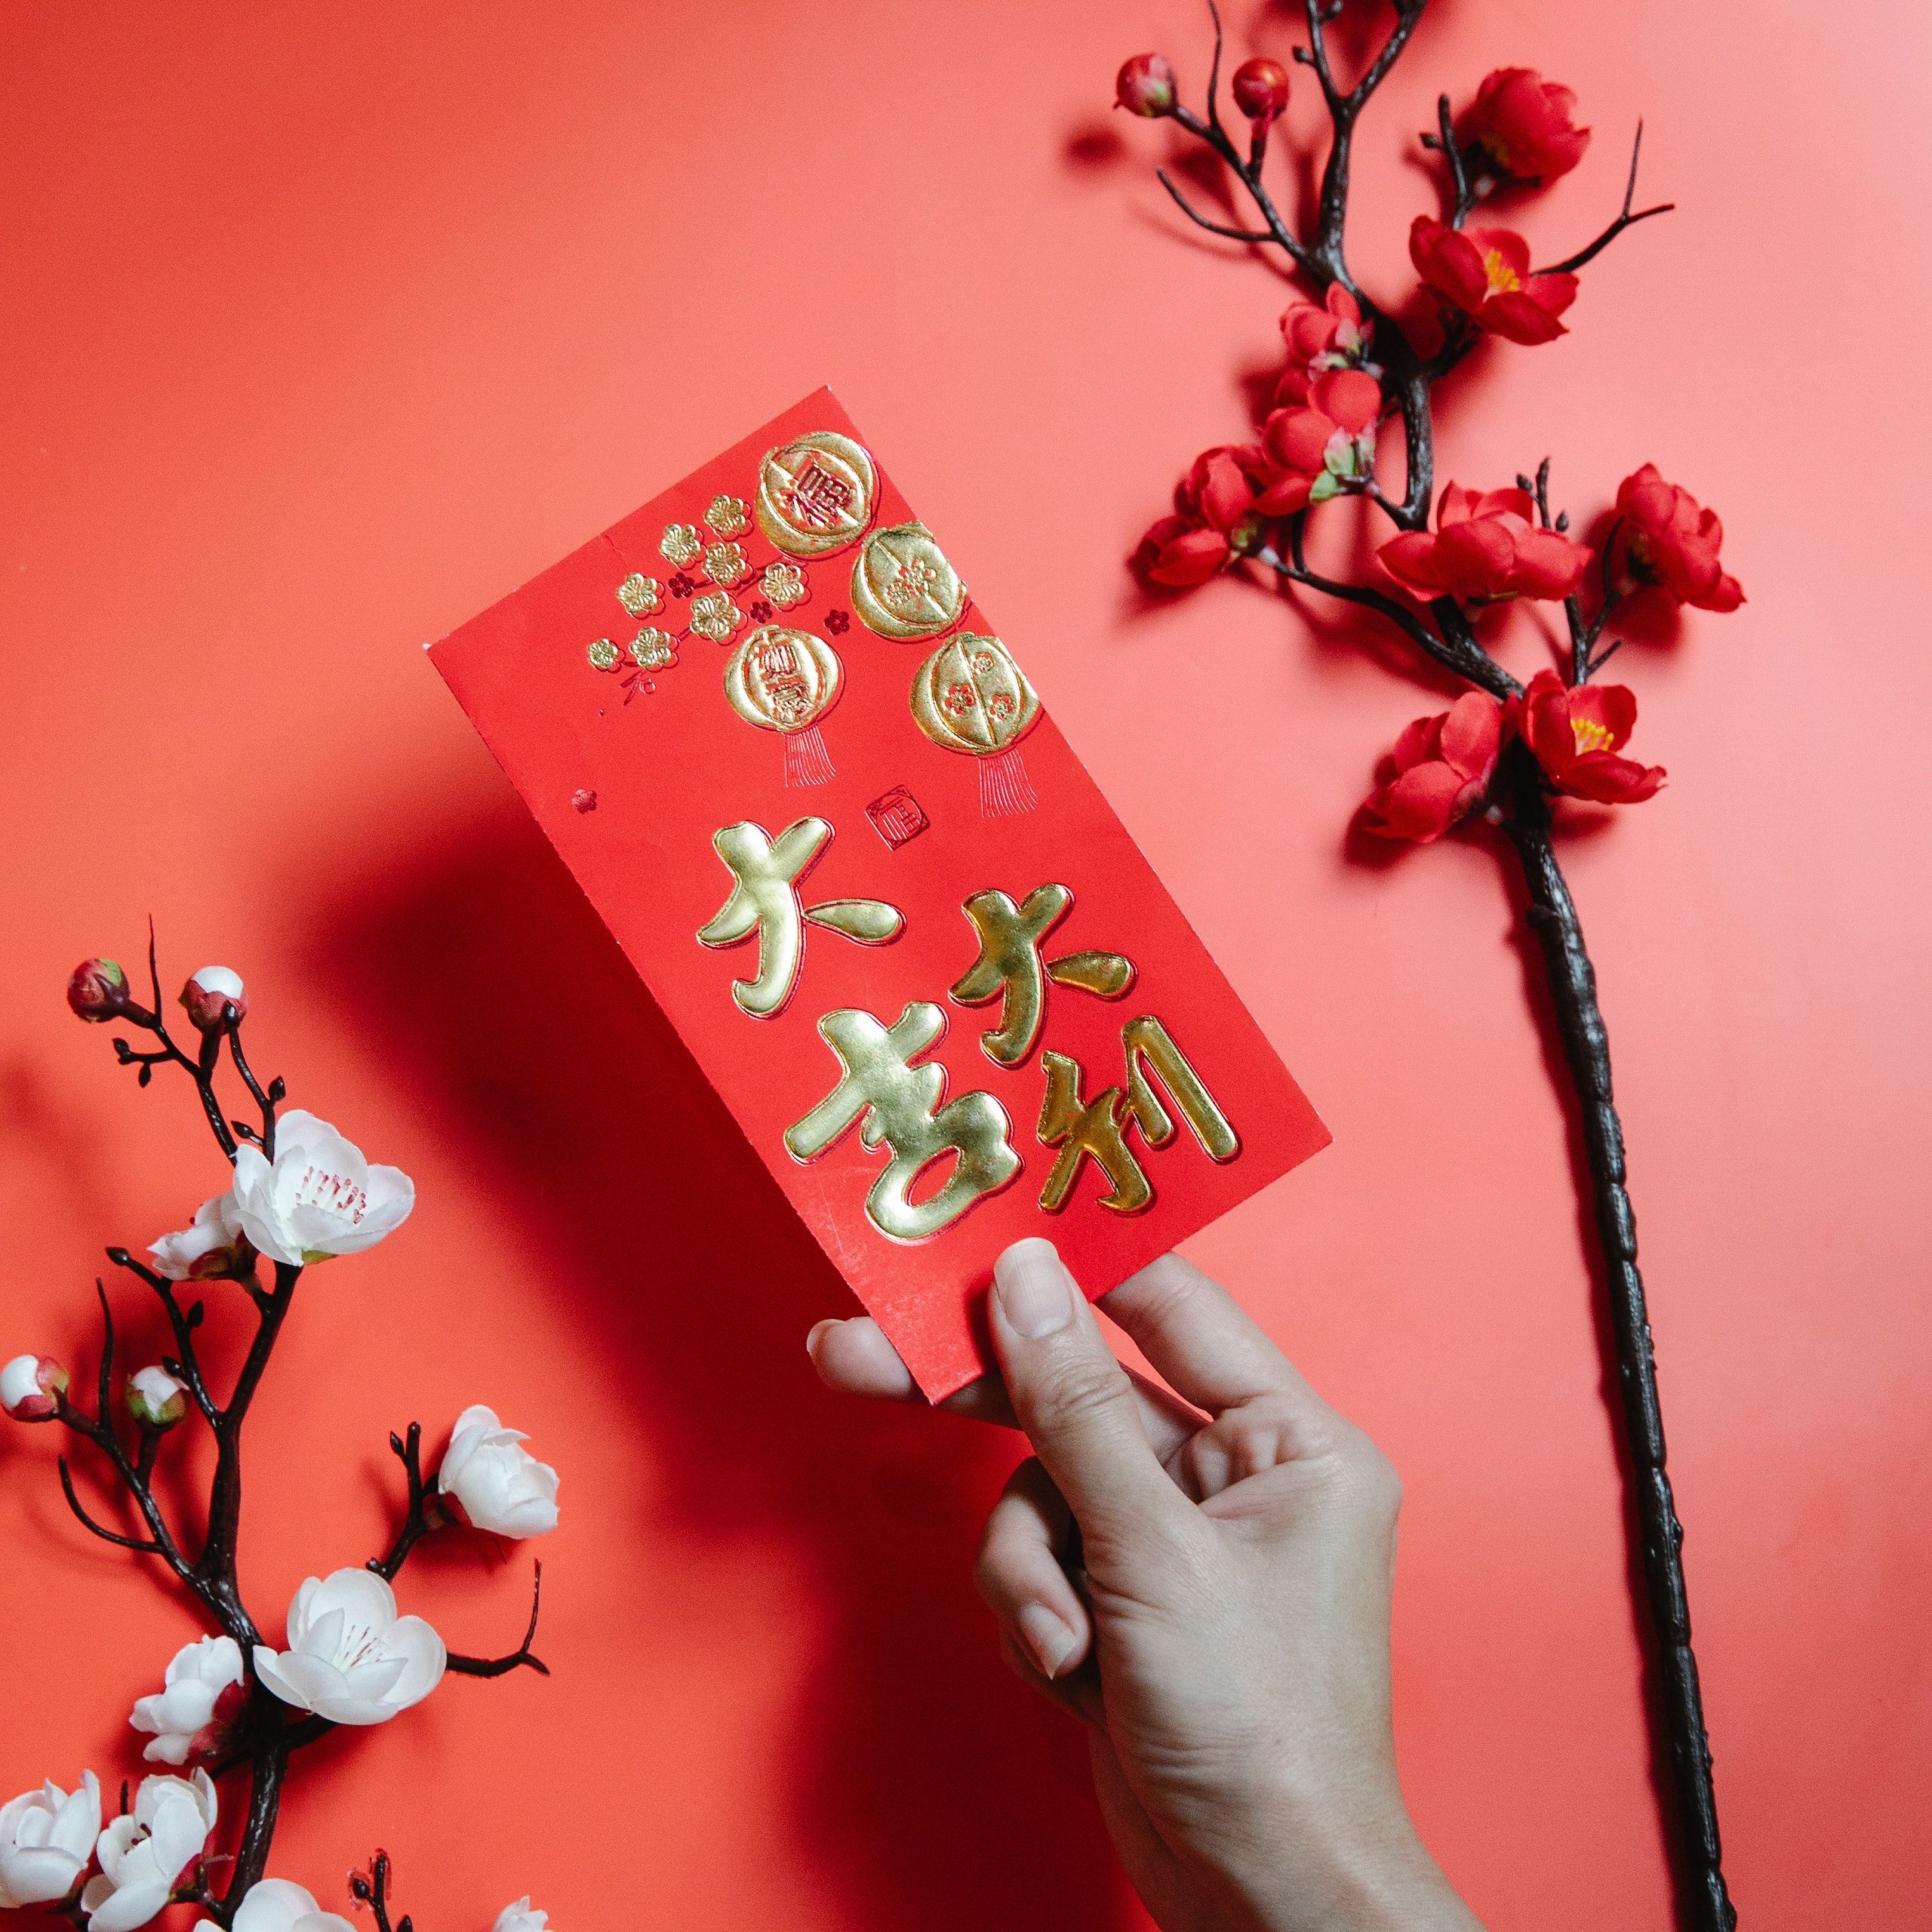 The Red Envelope Or Hong Bao Used For Giving Money During The